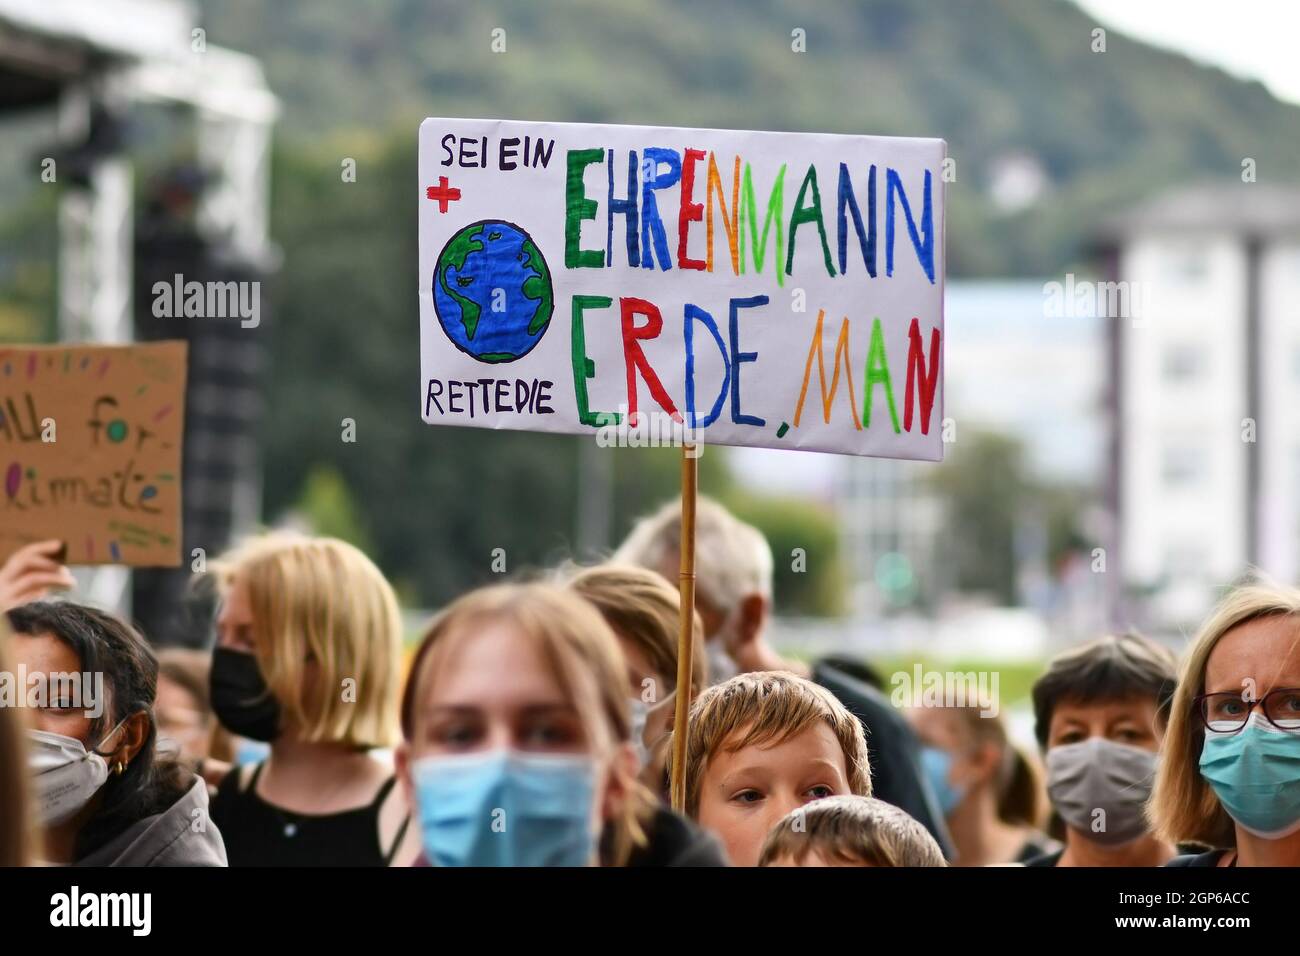 Heidelberg, Germany - 24th September 2021: Sign saying 'Be a gentleman, save the earth' in German at Global Climate Strike demonstration Stock Photo